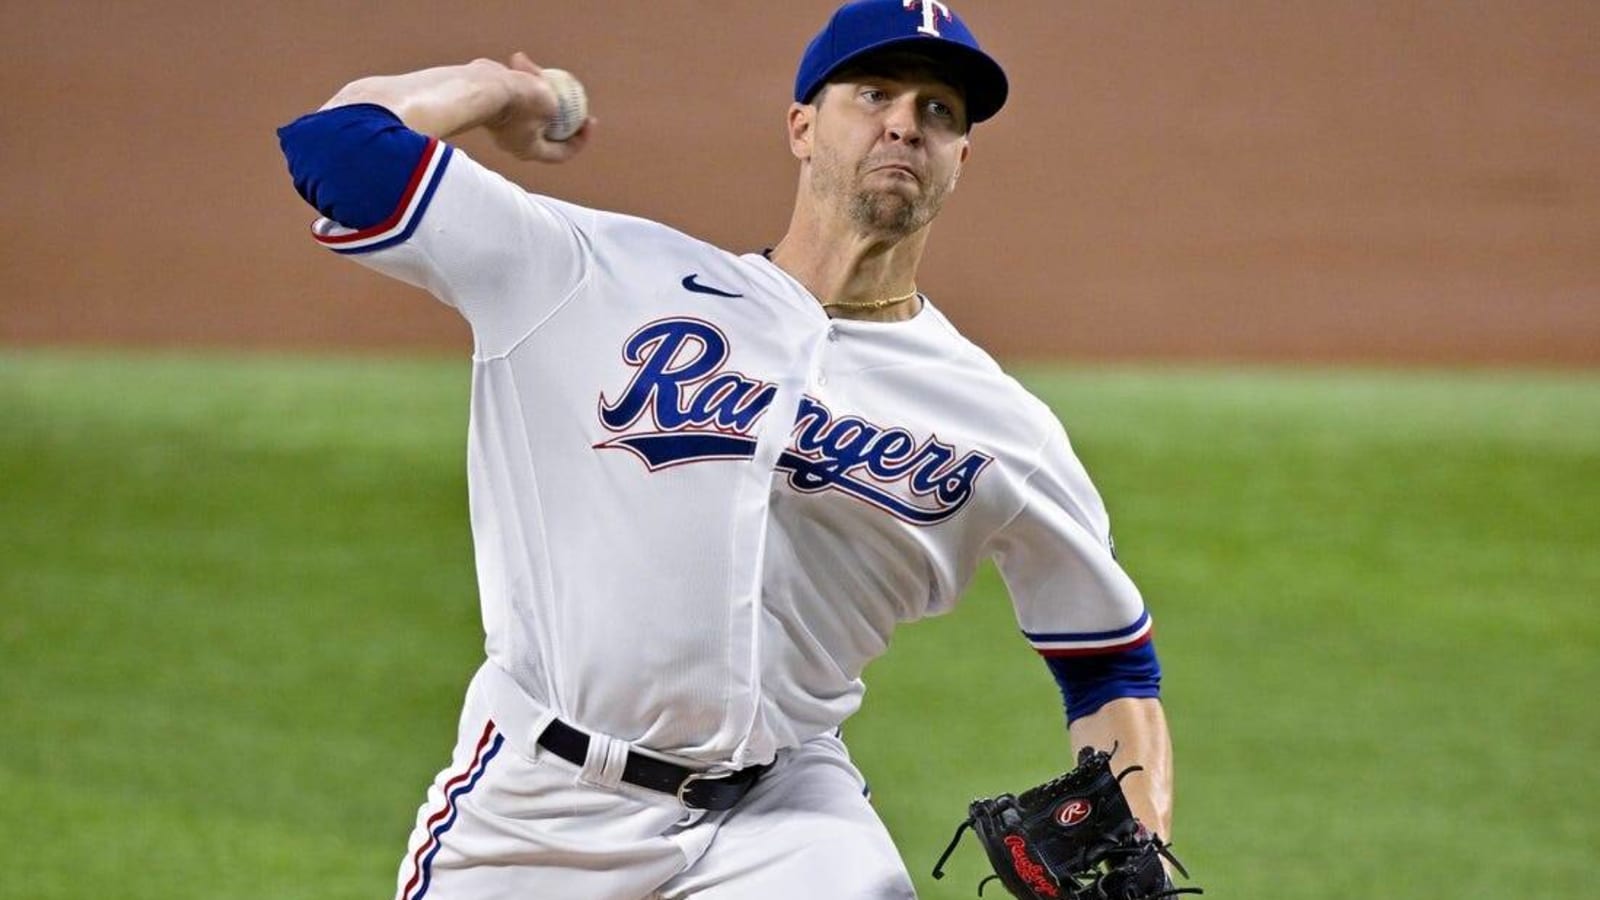 Jacob deGrom returns to the mound as Rangers face Royals